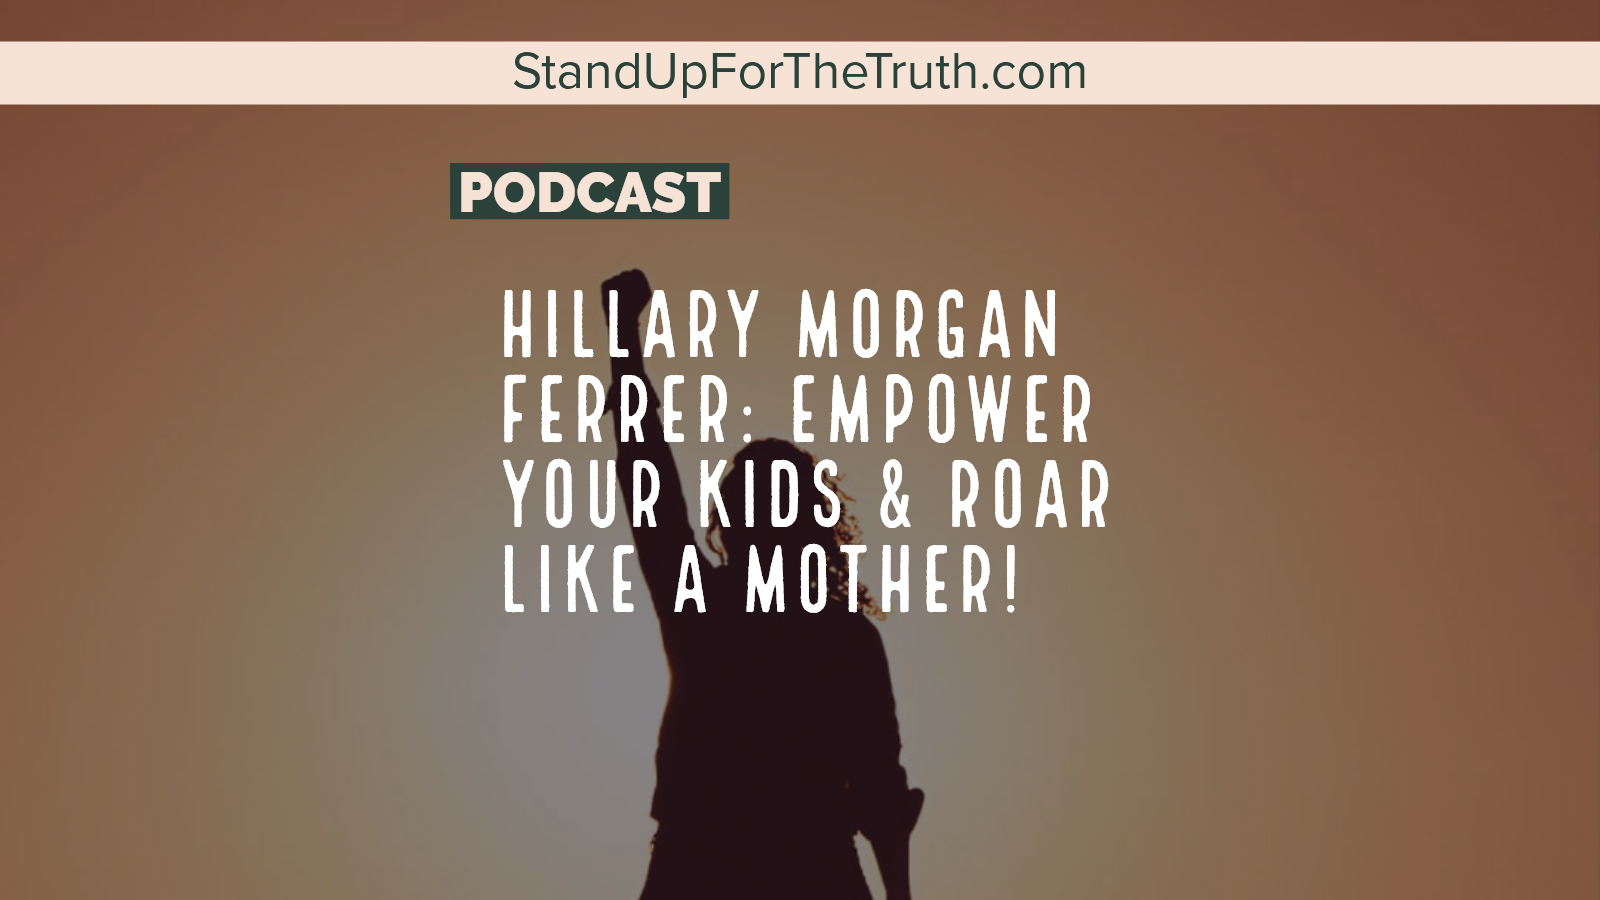 Mama Bear Apologetics: Empowering Your Kids to Challenge Cultural Lies by  Hillary Morgan Ferrer, Paperback